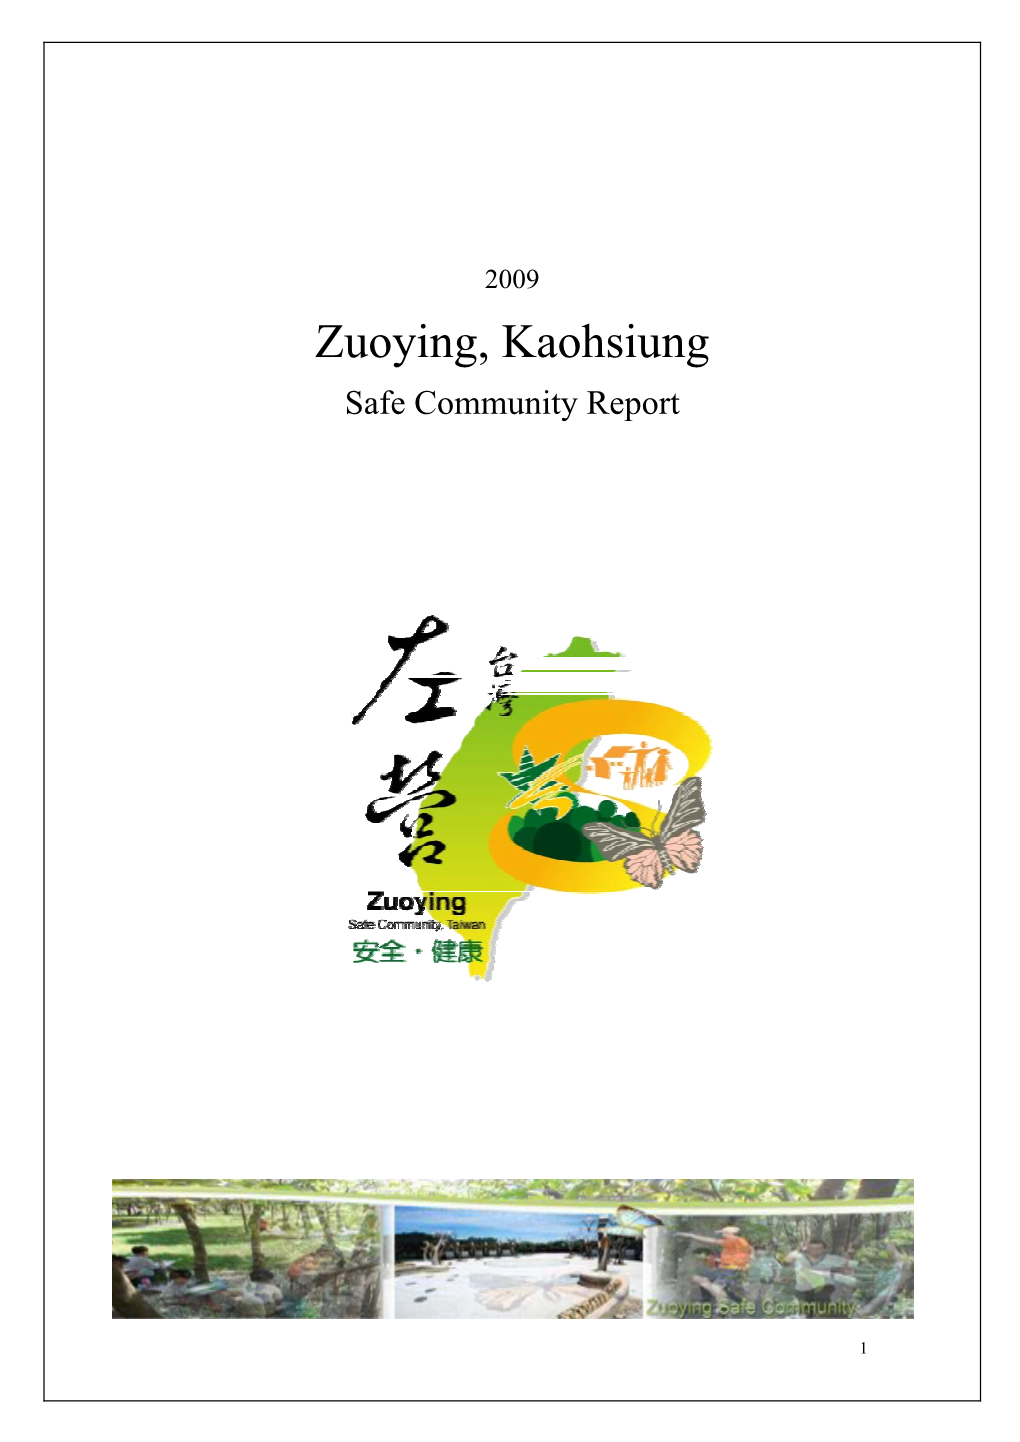 Zuoying, Kaohsiung Safe Community Report